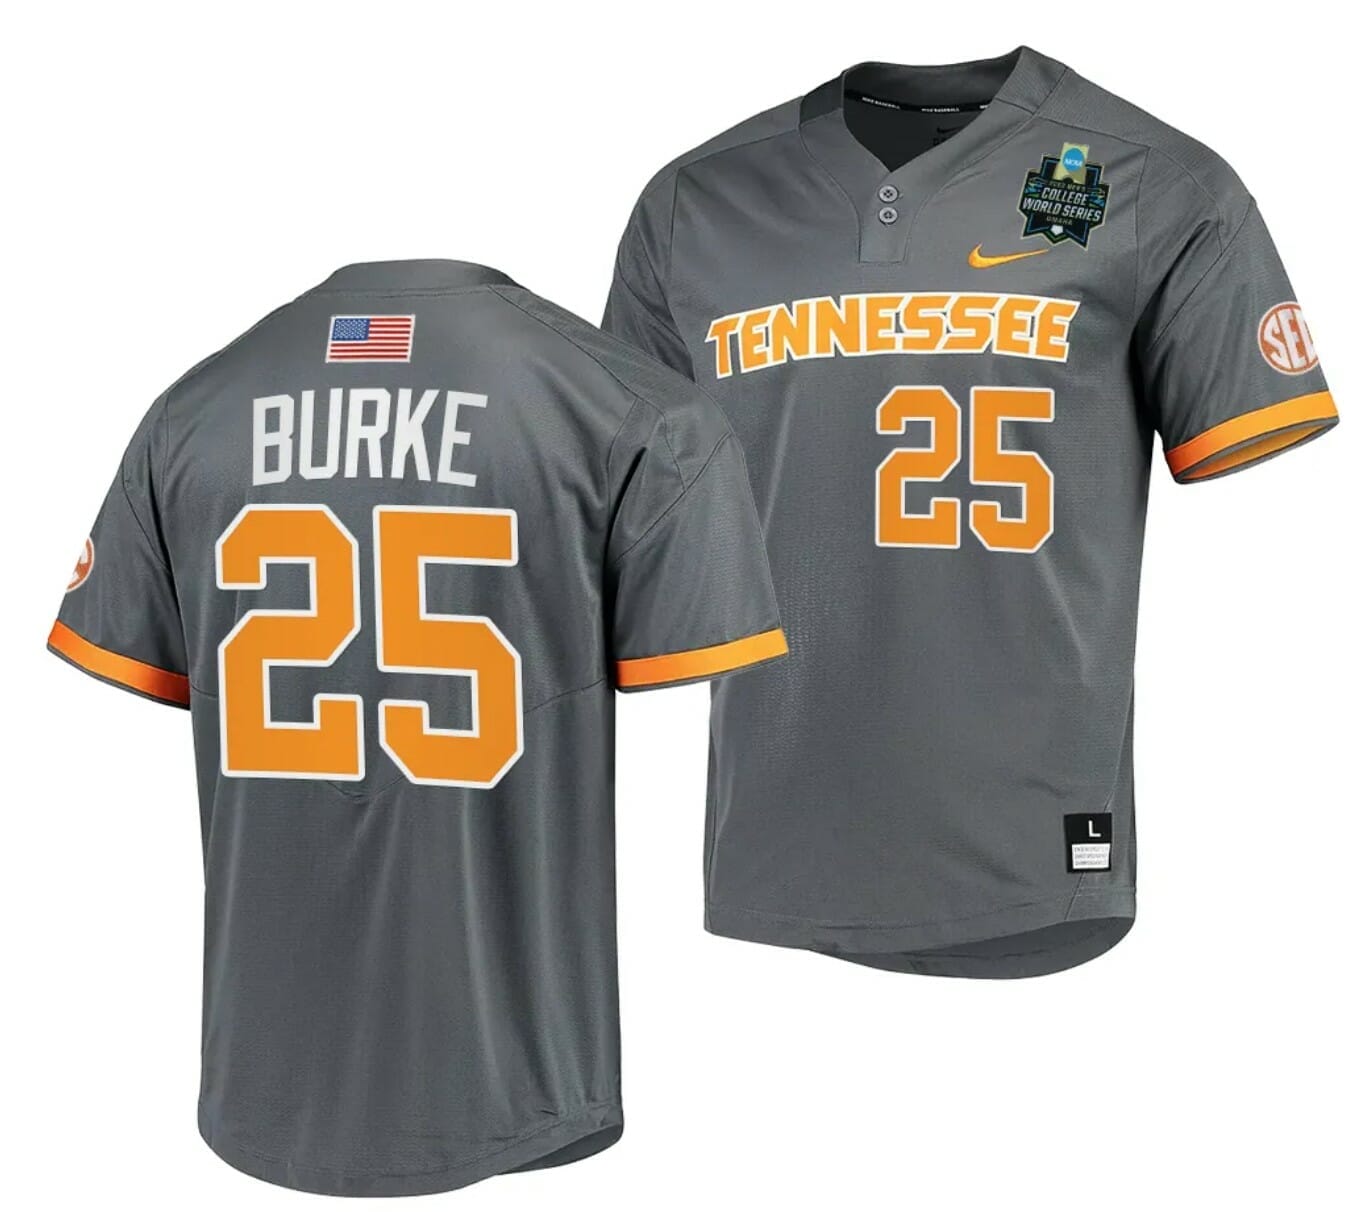 Available] Get New Blake Burke Jersey Tennessee Grey #25